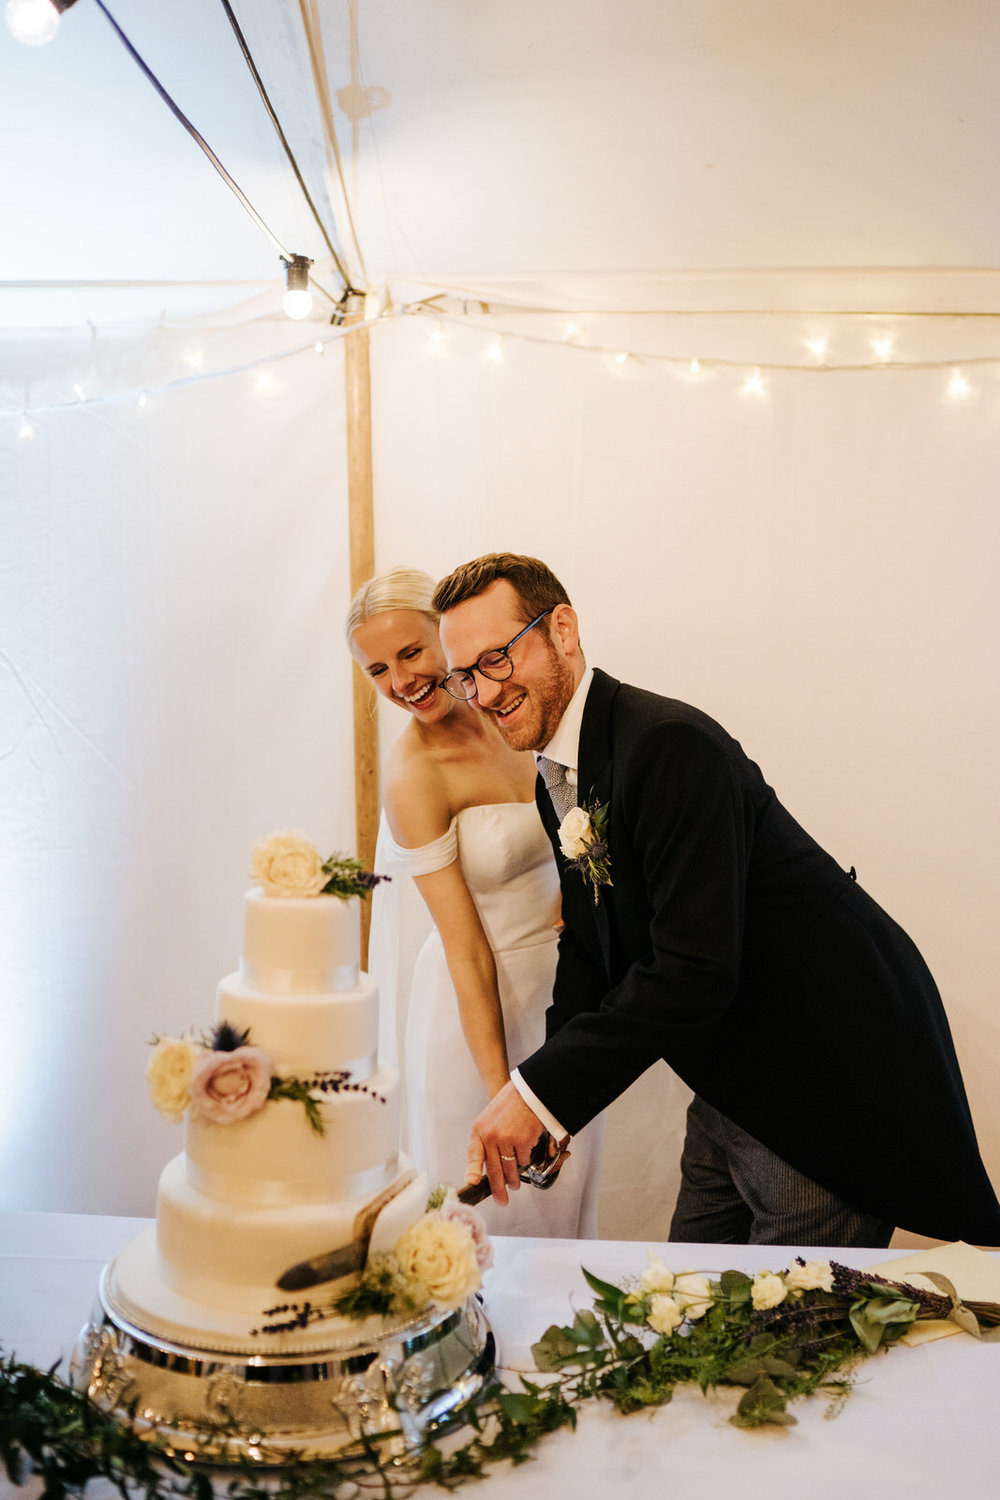  Bride and groom smile as they cut the wedding cake with a sword 